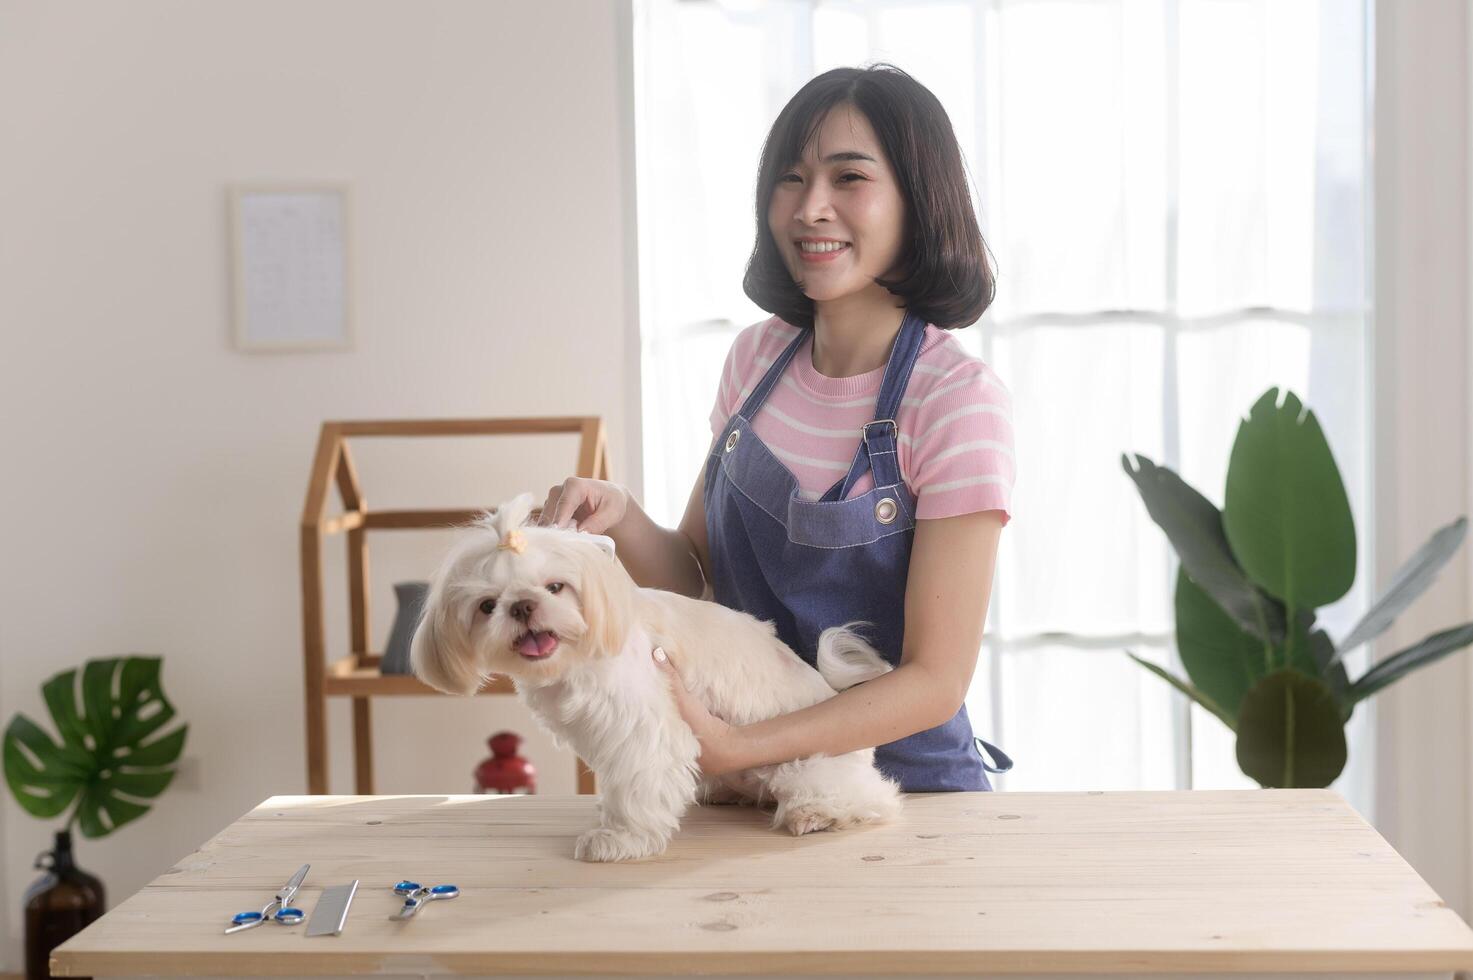 Female professional groomer trimming haircut and combing dog fur at pet spa grooming salon photo